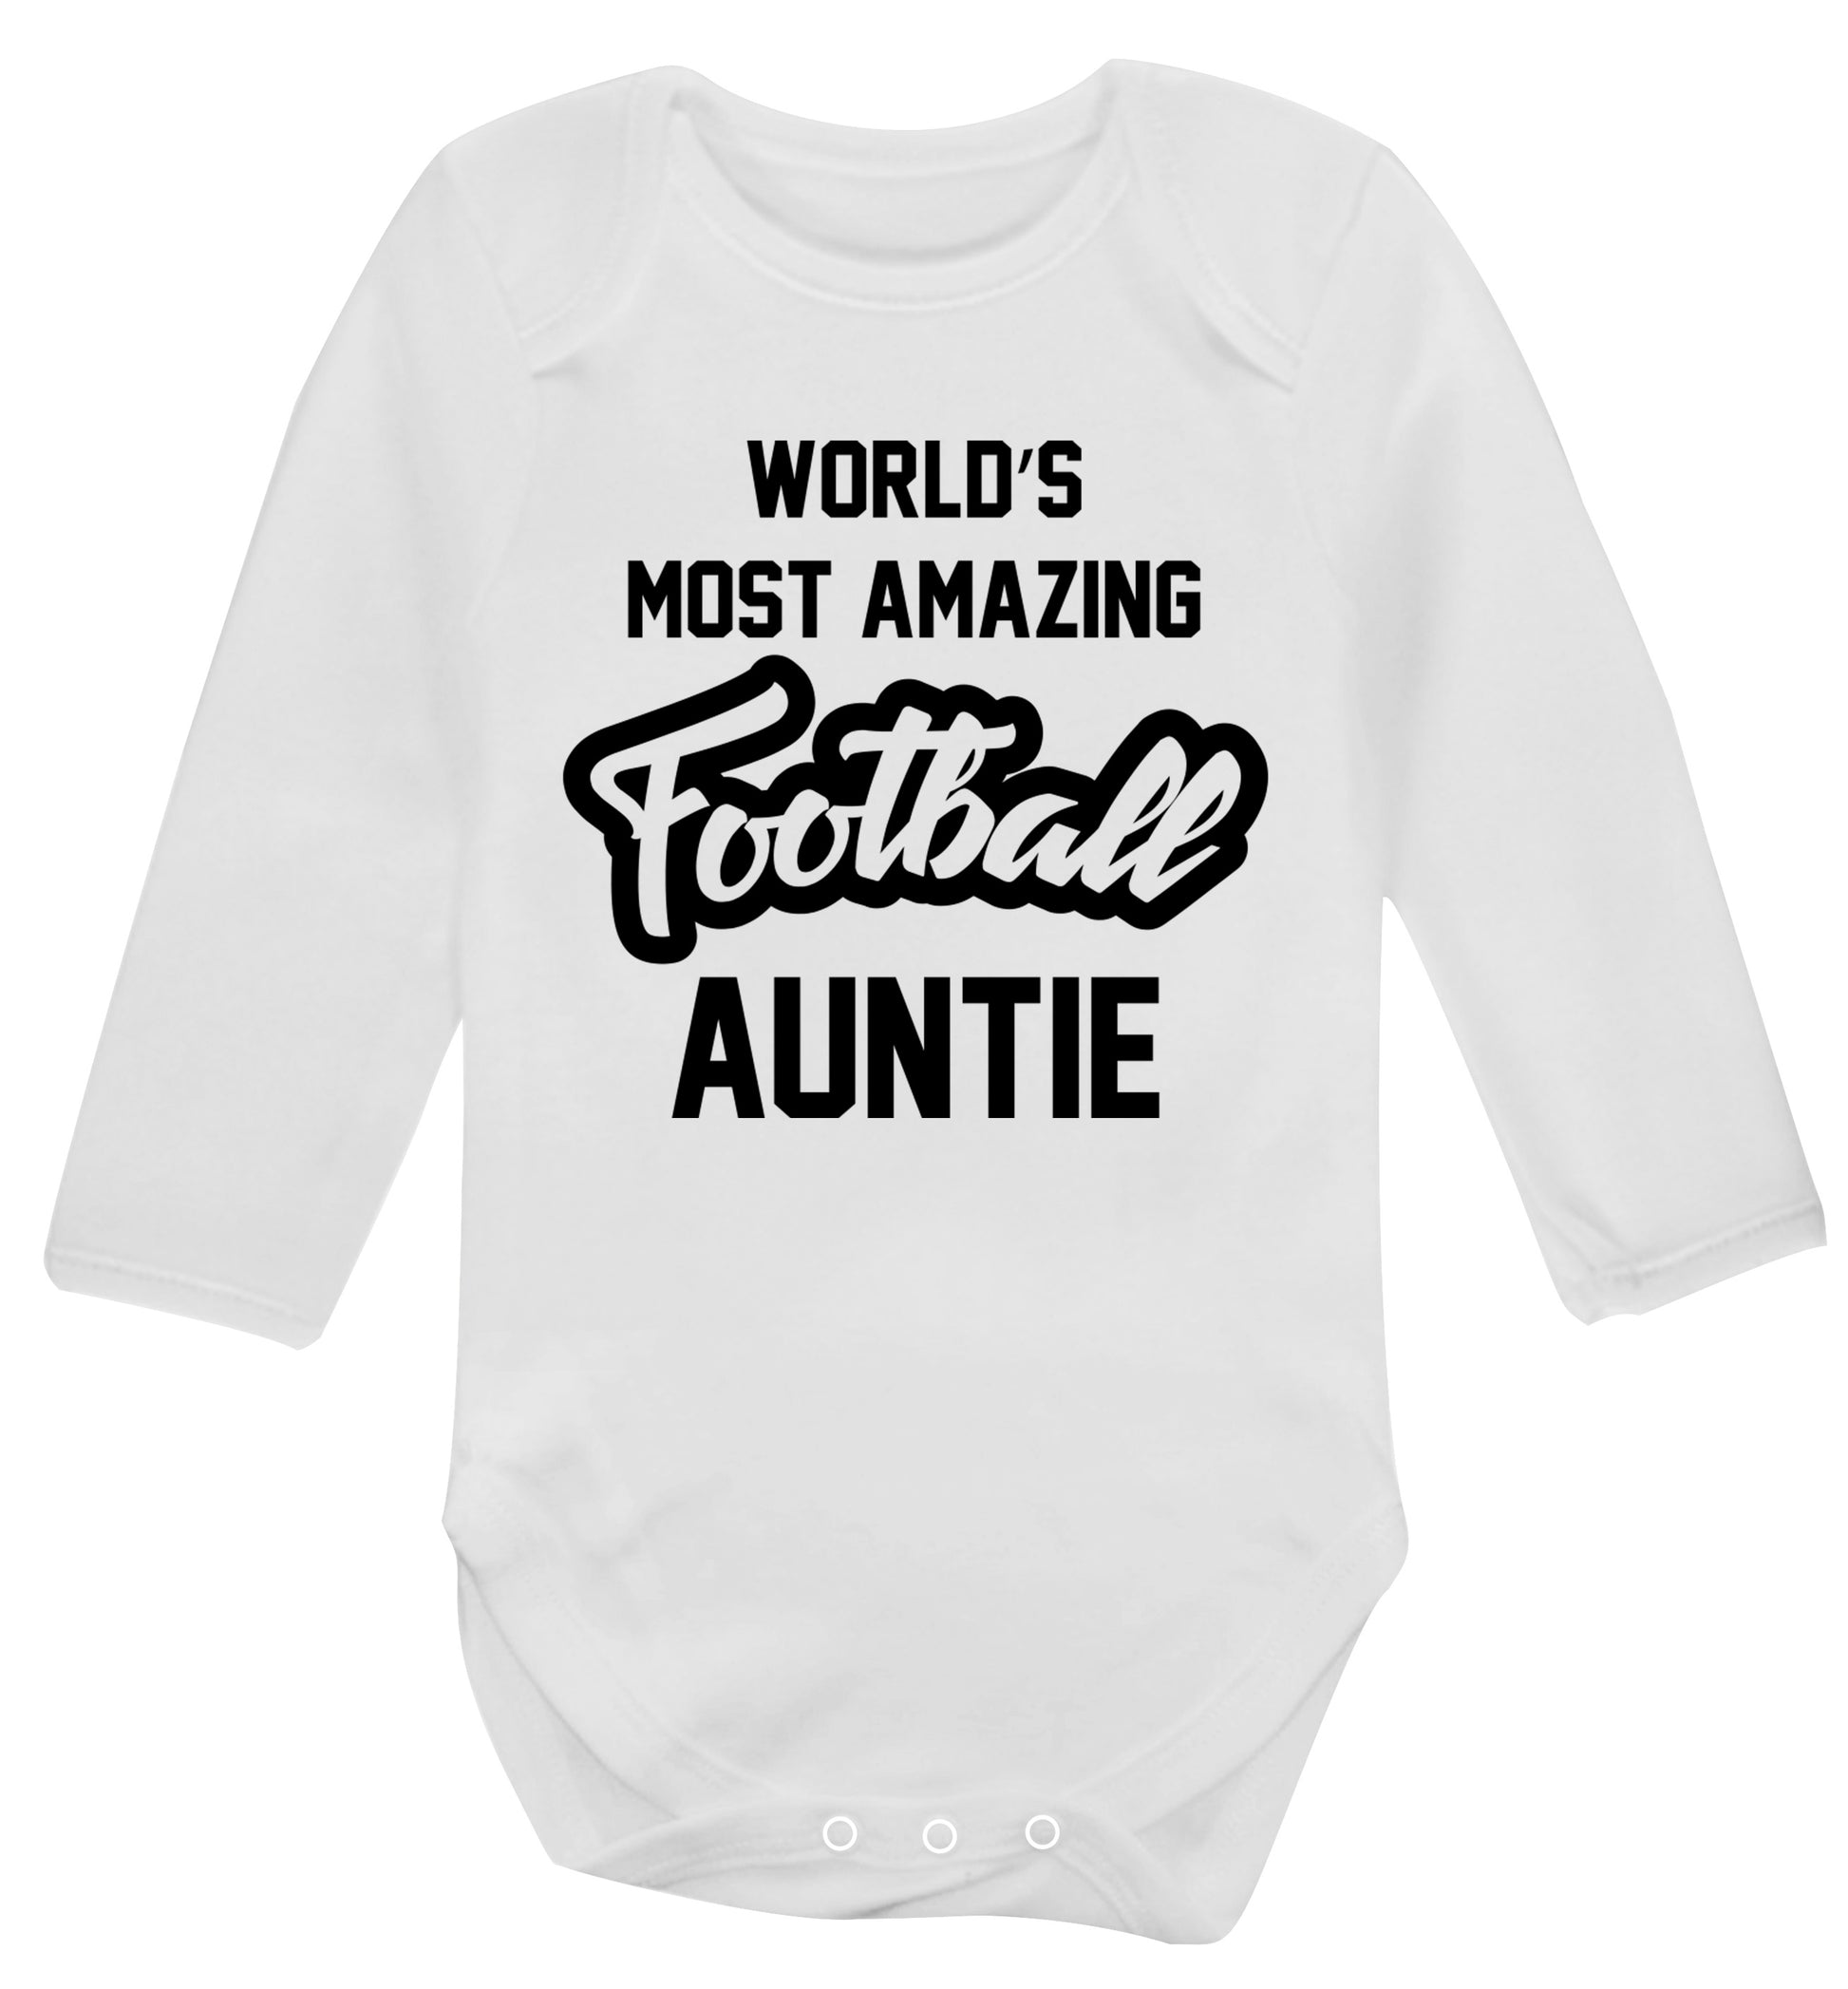 Worlds most amazing football auntie Baby Vest long sleeved white 6-12 months